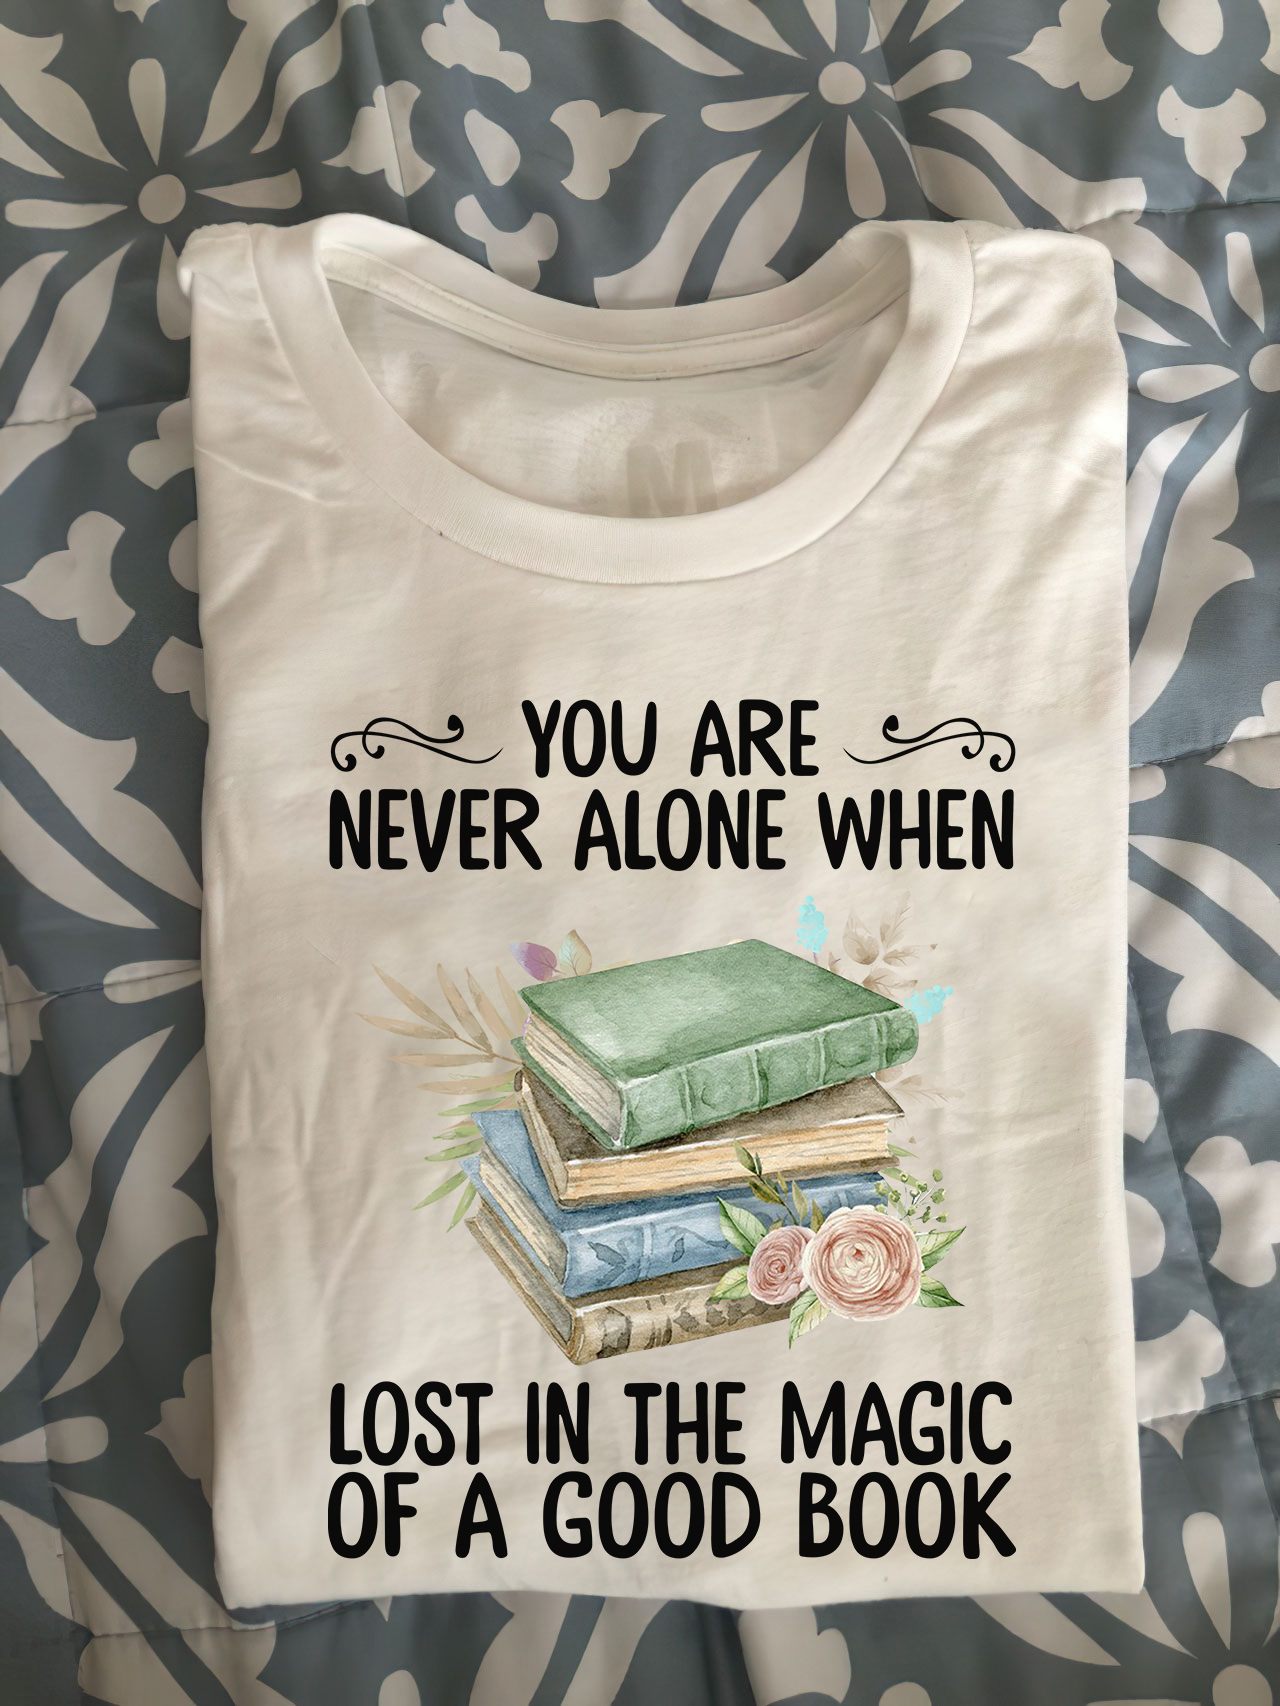 You are never alone when lost in the magic of a good book